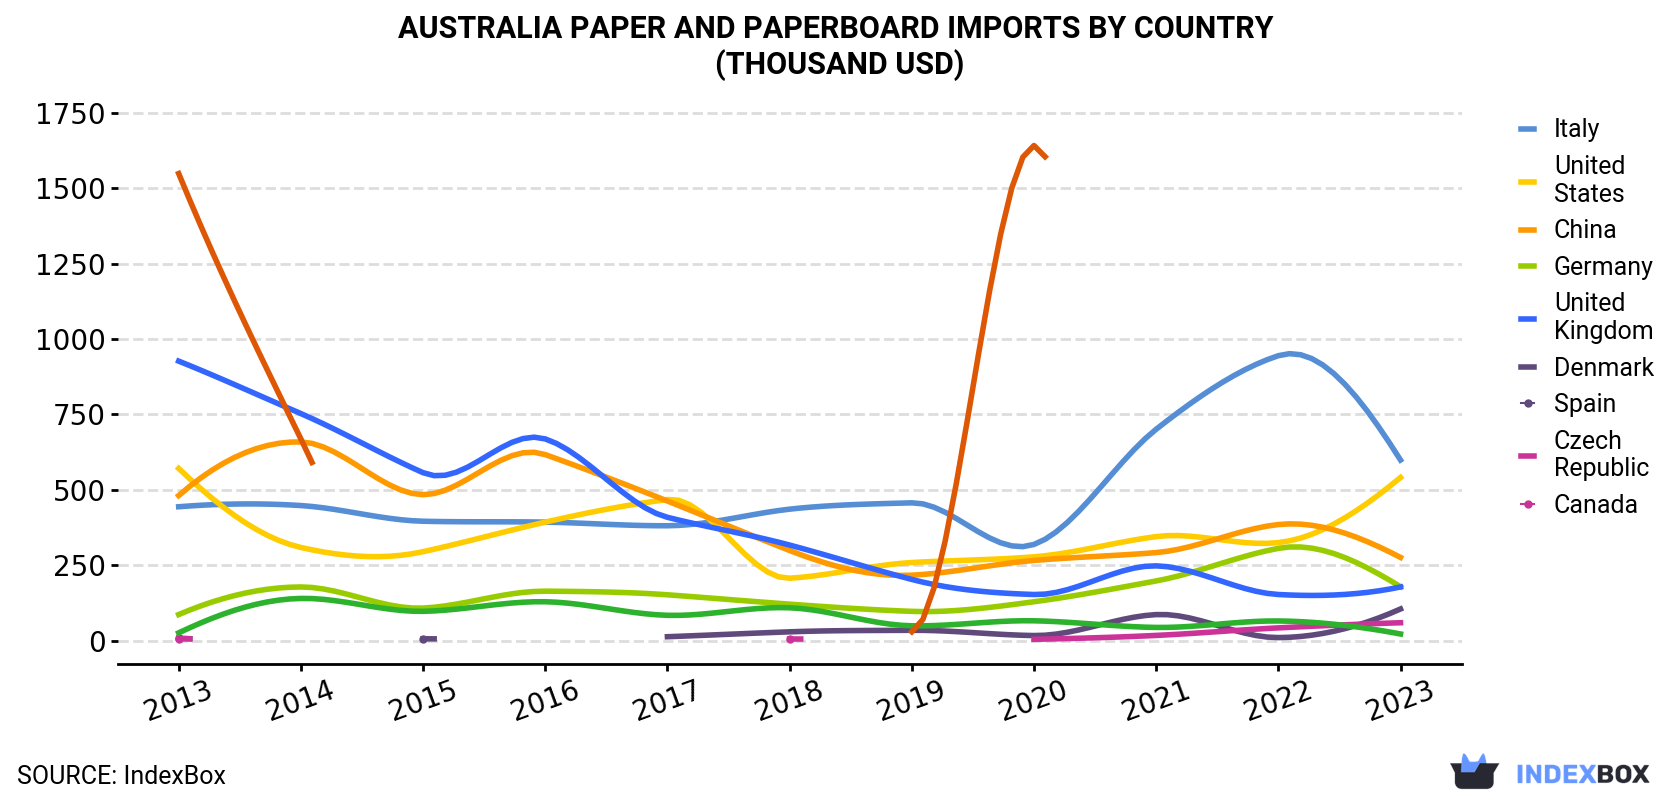 Australia Paper And Paperboard Imports By Country (Thousand USD)